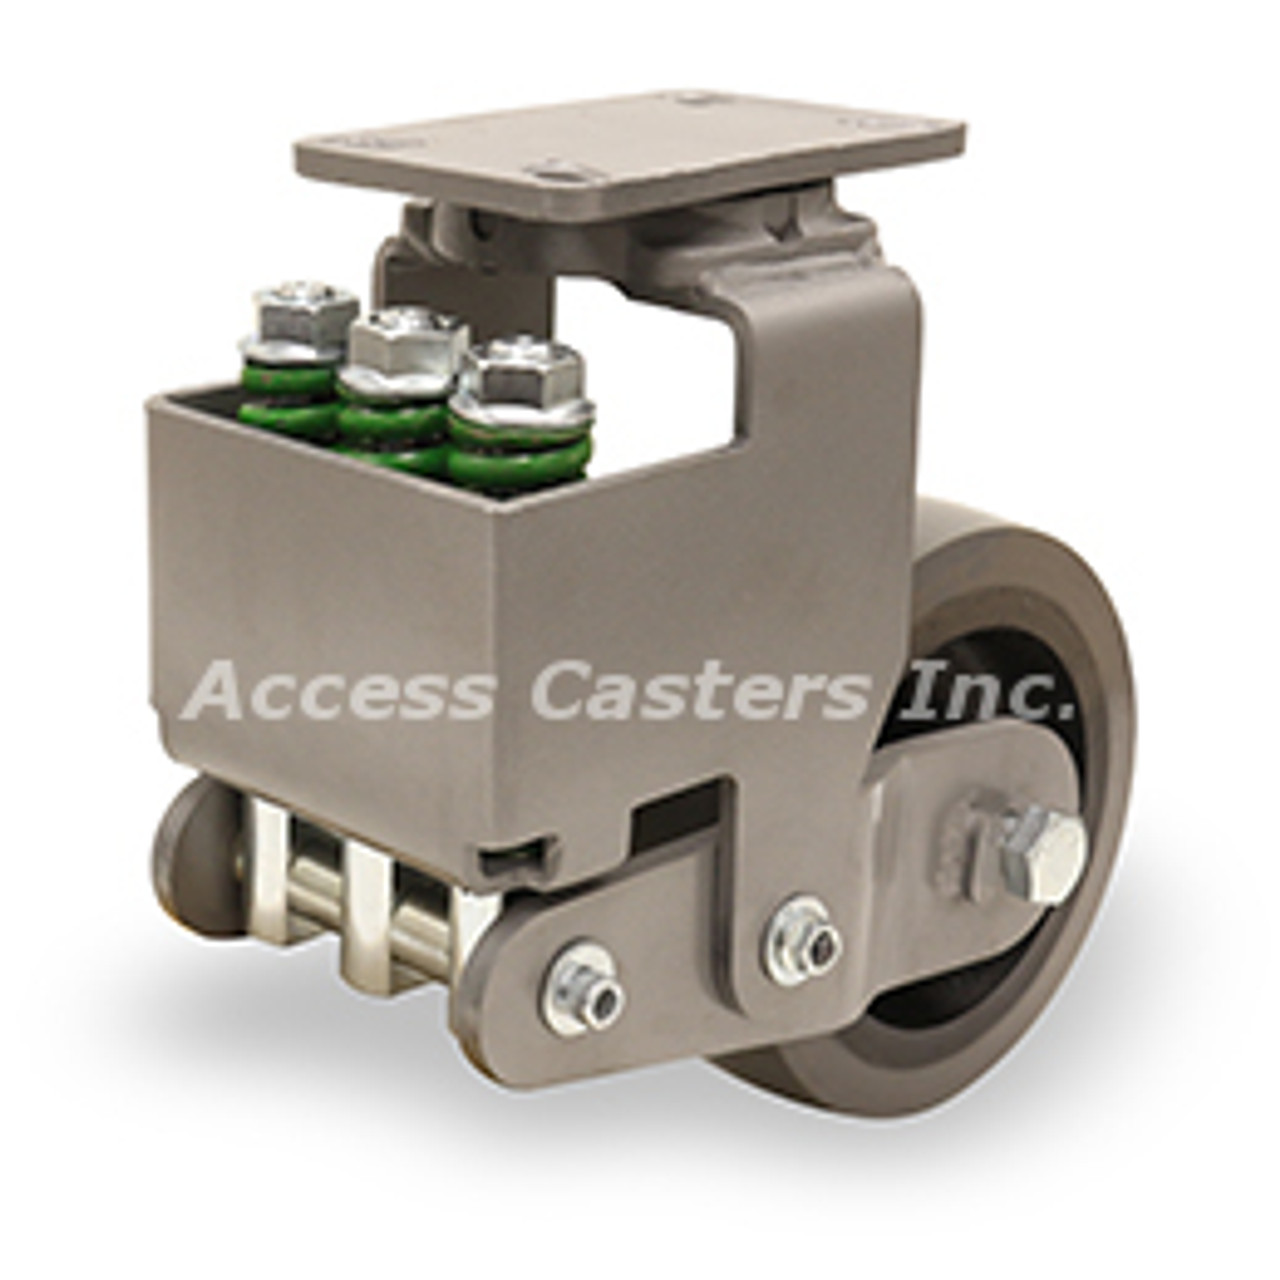 S-AEZFFM-83GB95 Spring loaded caster with 6" x 3" Duraglide wheel